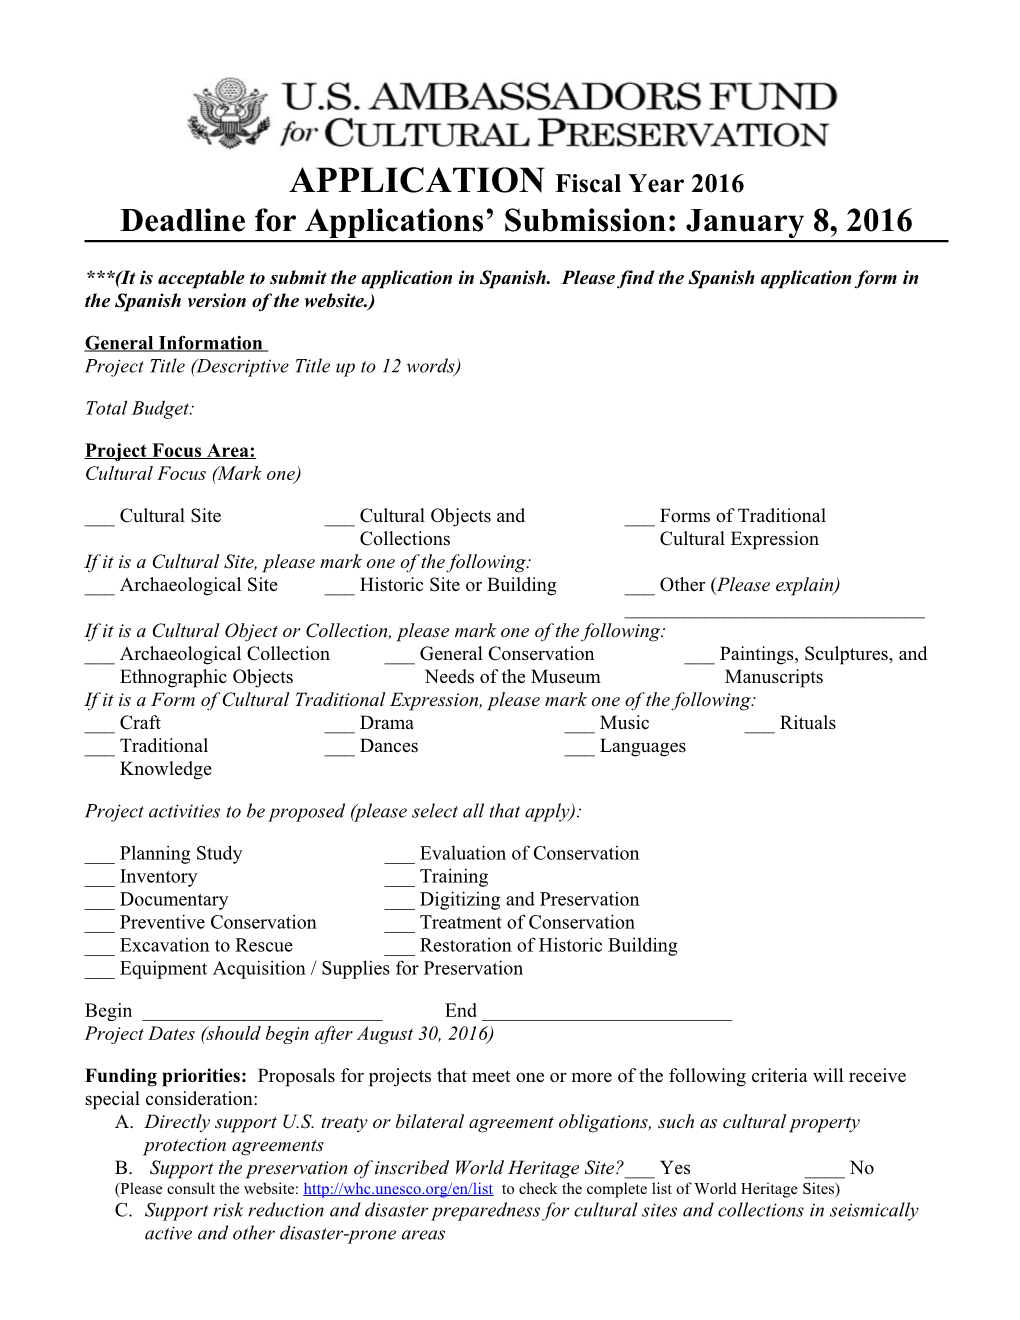 APPLICATION Fiscal Year 2016